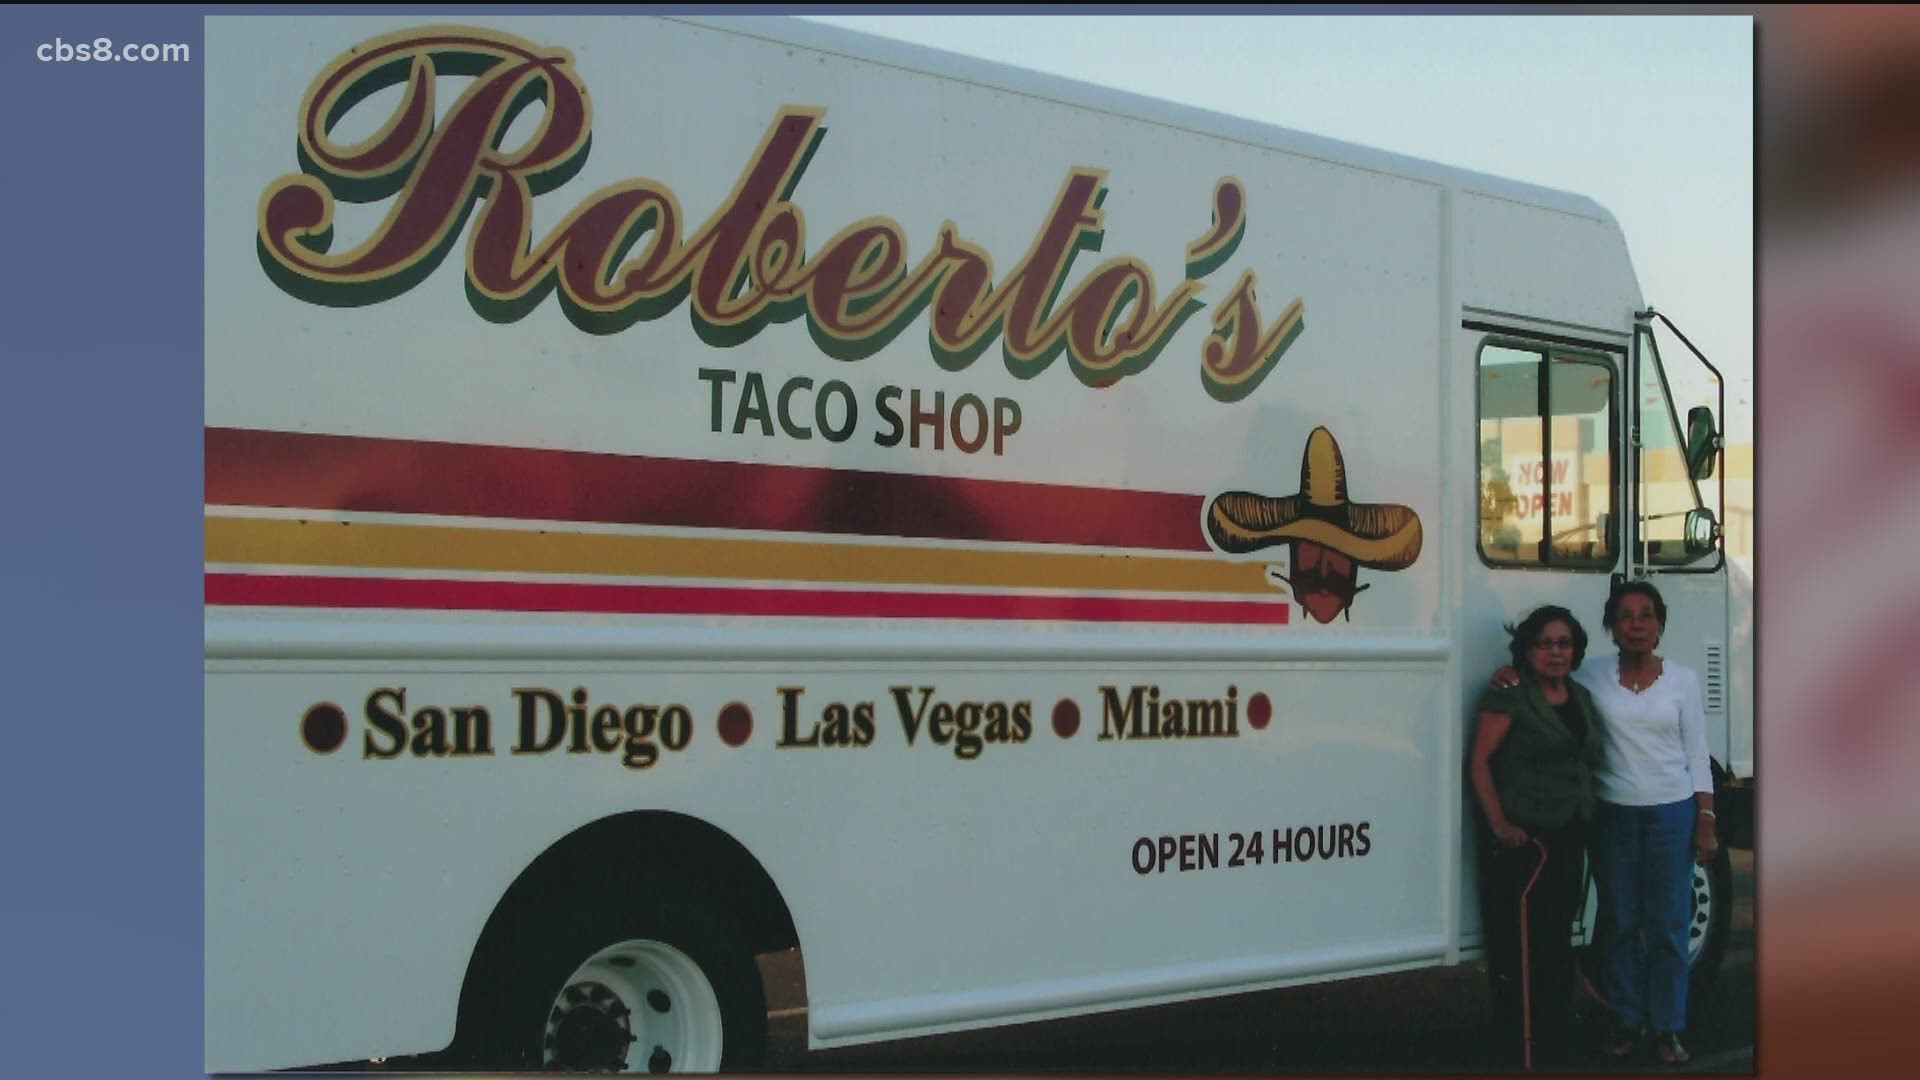 Behind the booming restaurant was Dolores, a savvy businesswoman and hard-worker who established the Roberto’s name and kept it in the family for her 13 children.